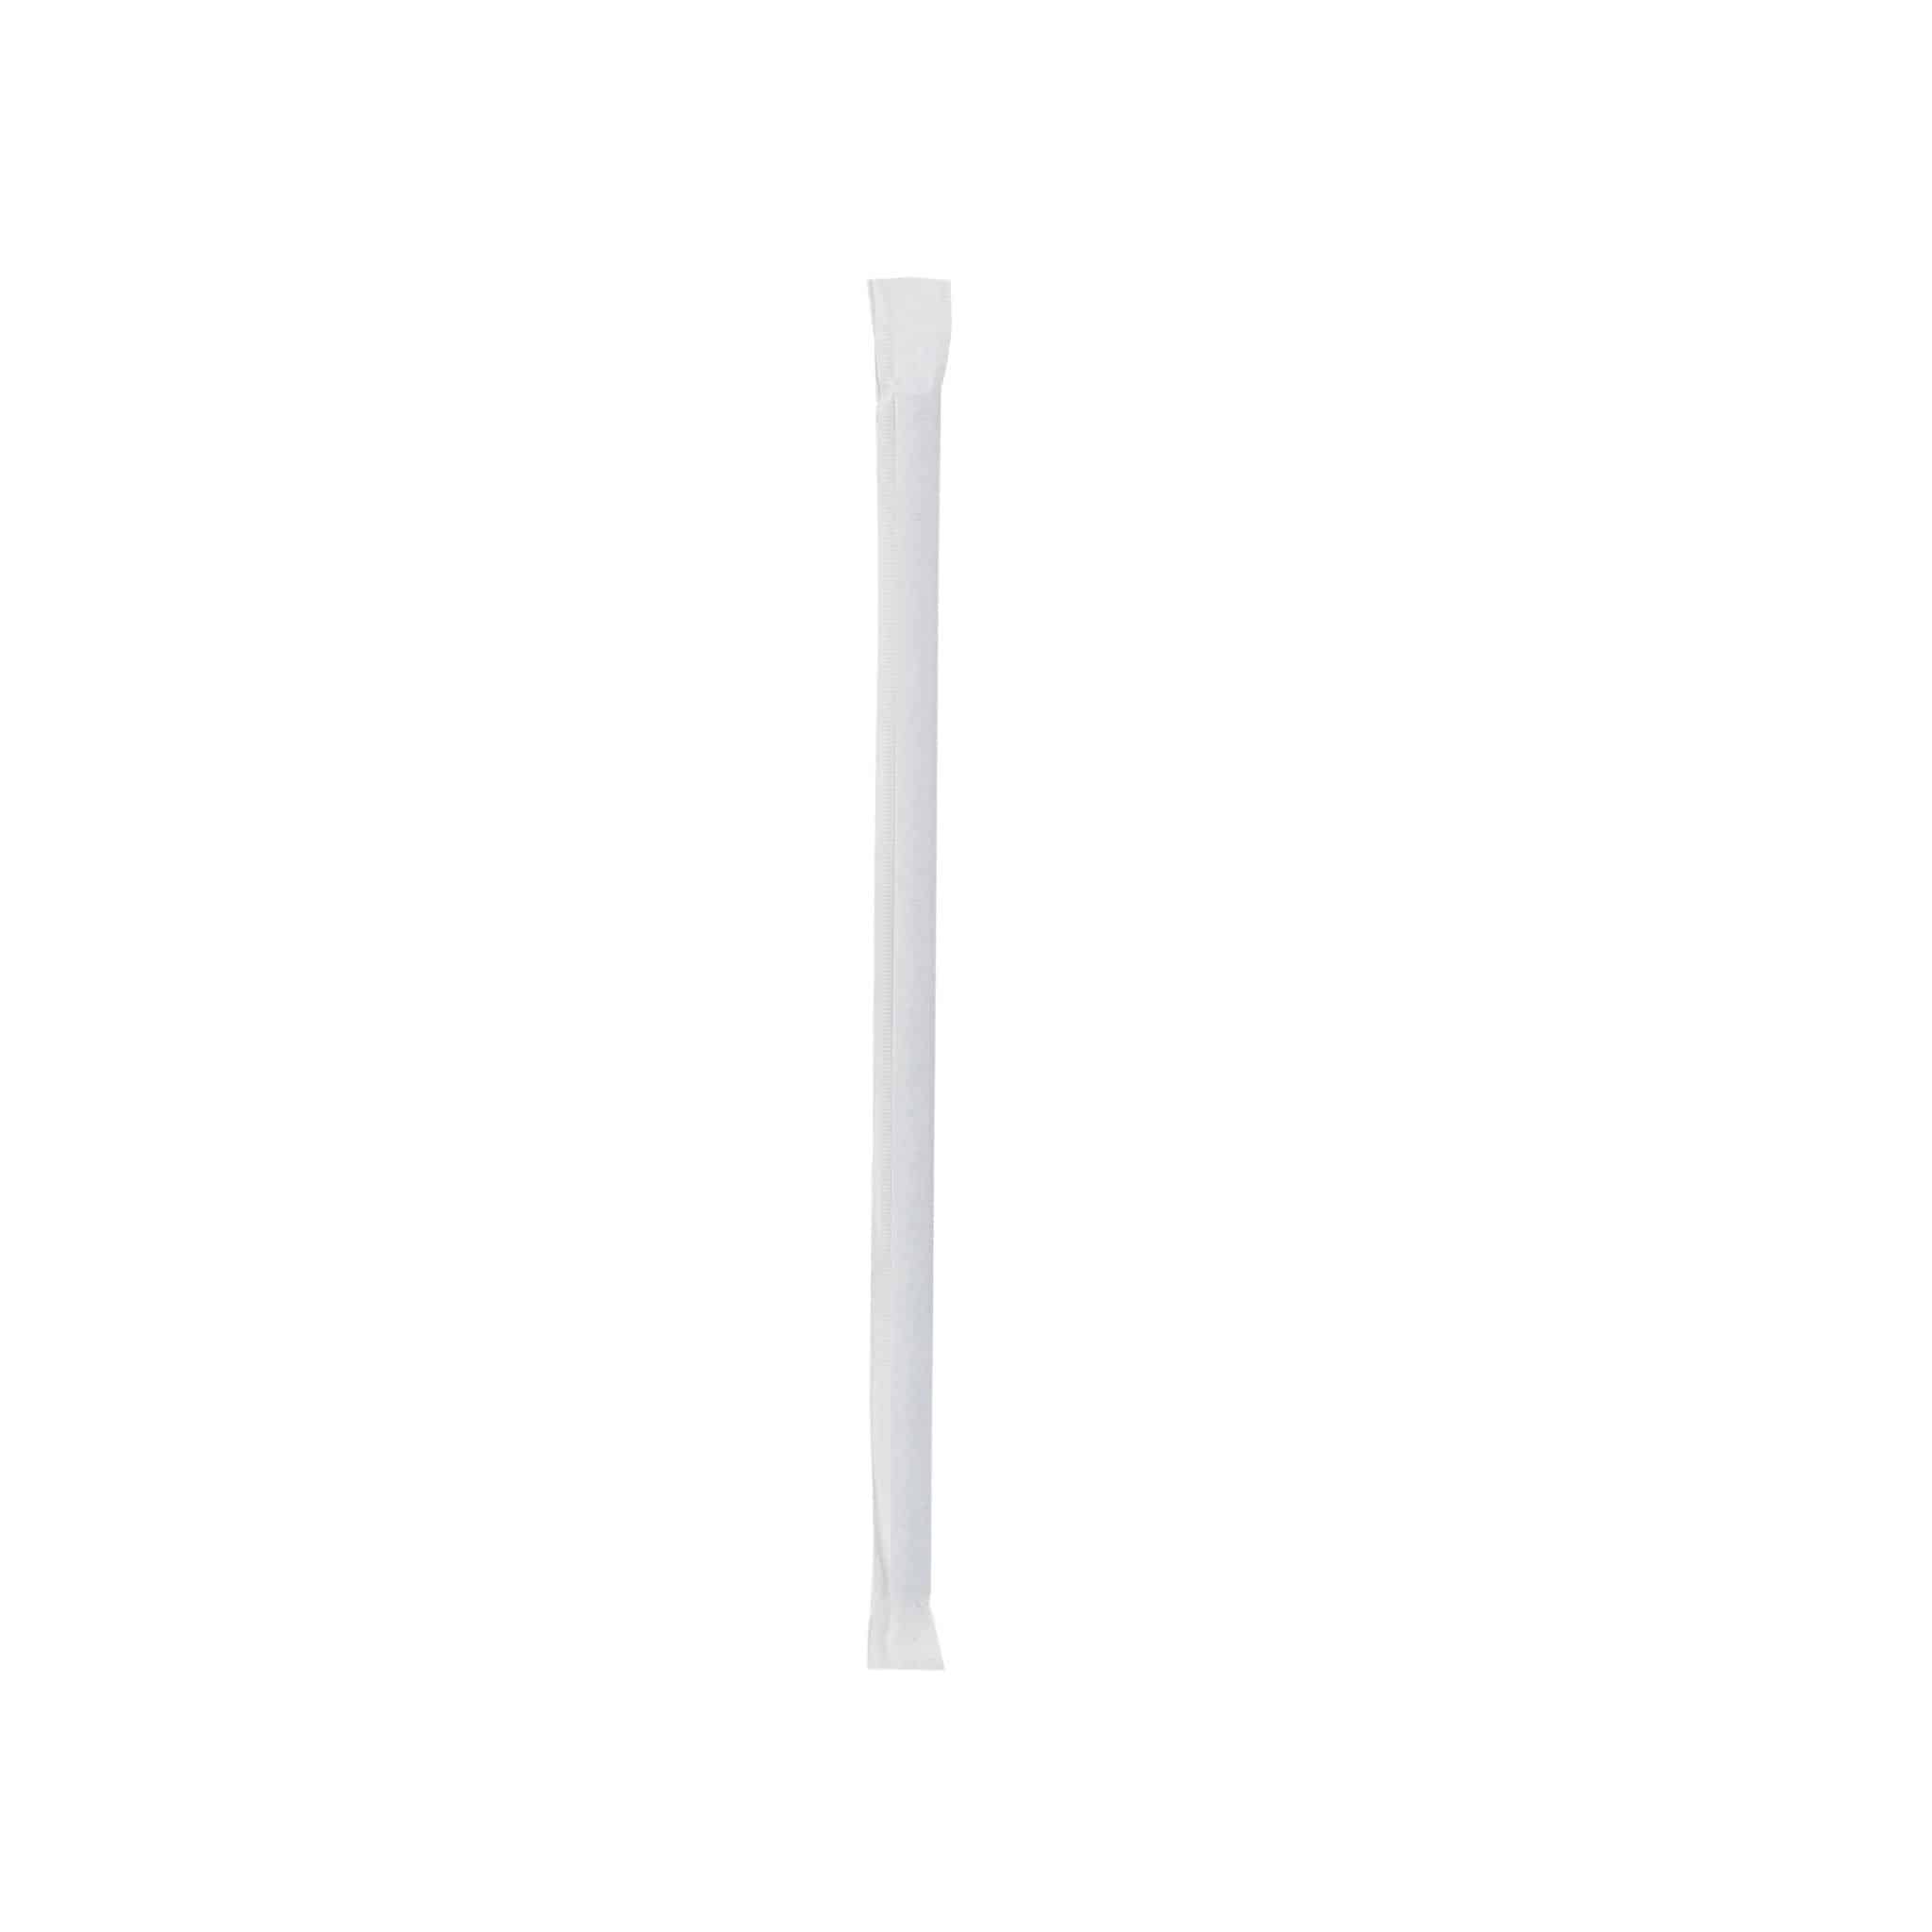 7mm Black Straight Straw Wrapped 250 Pieces x 40 Packet - Hotpack Global